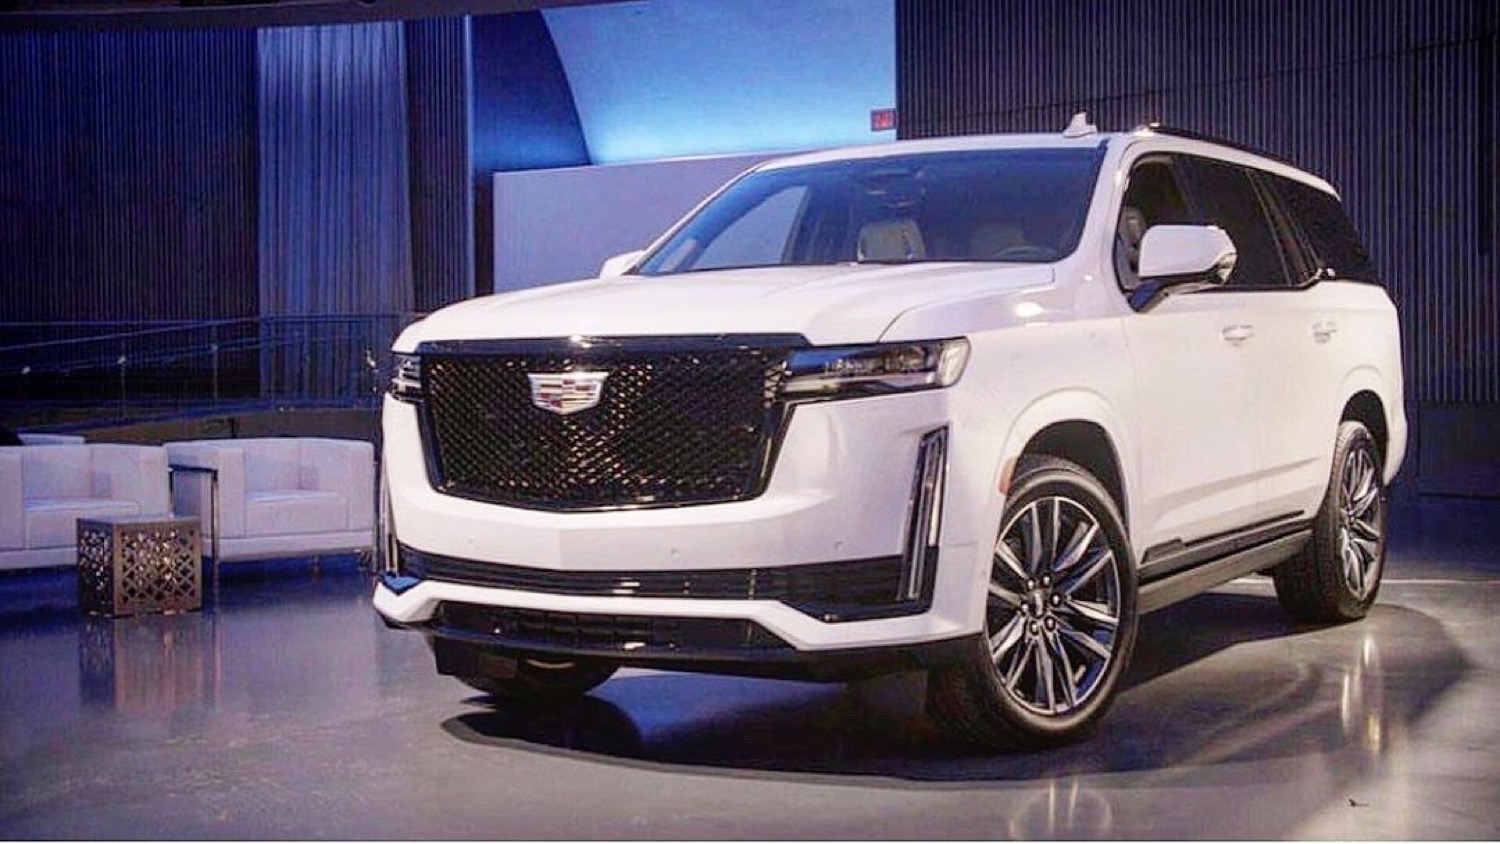 2021 Cadillac Escalade Leaks Hours Before Debut Gm Authority